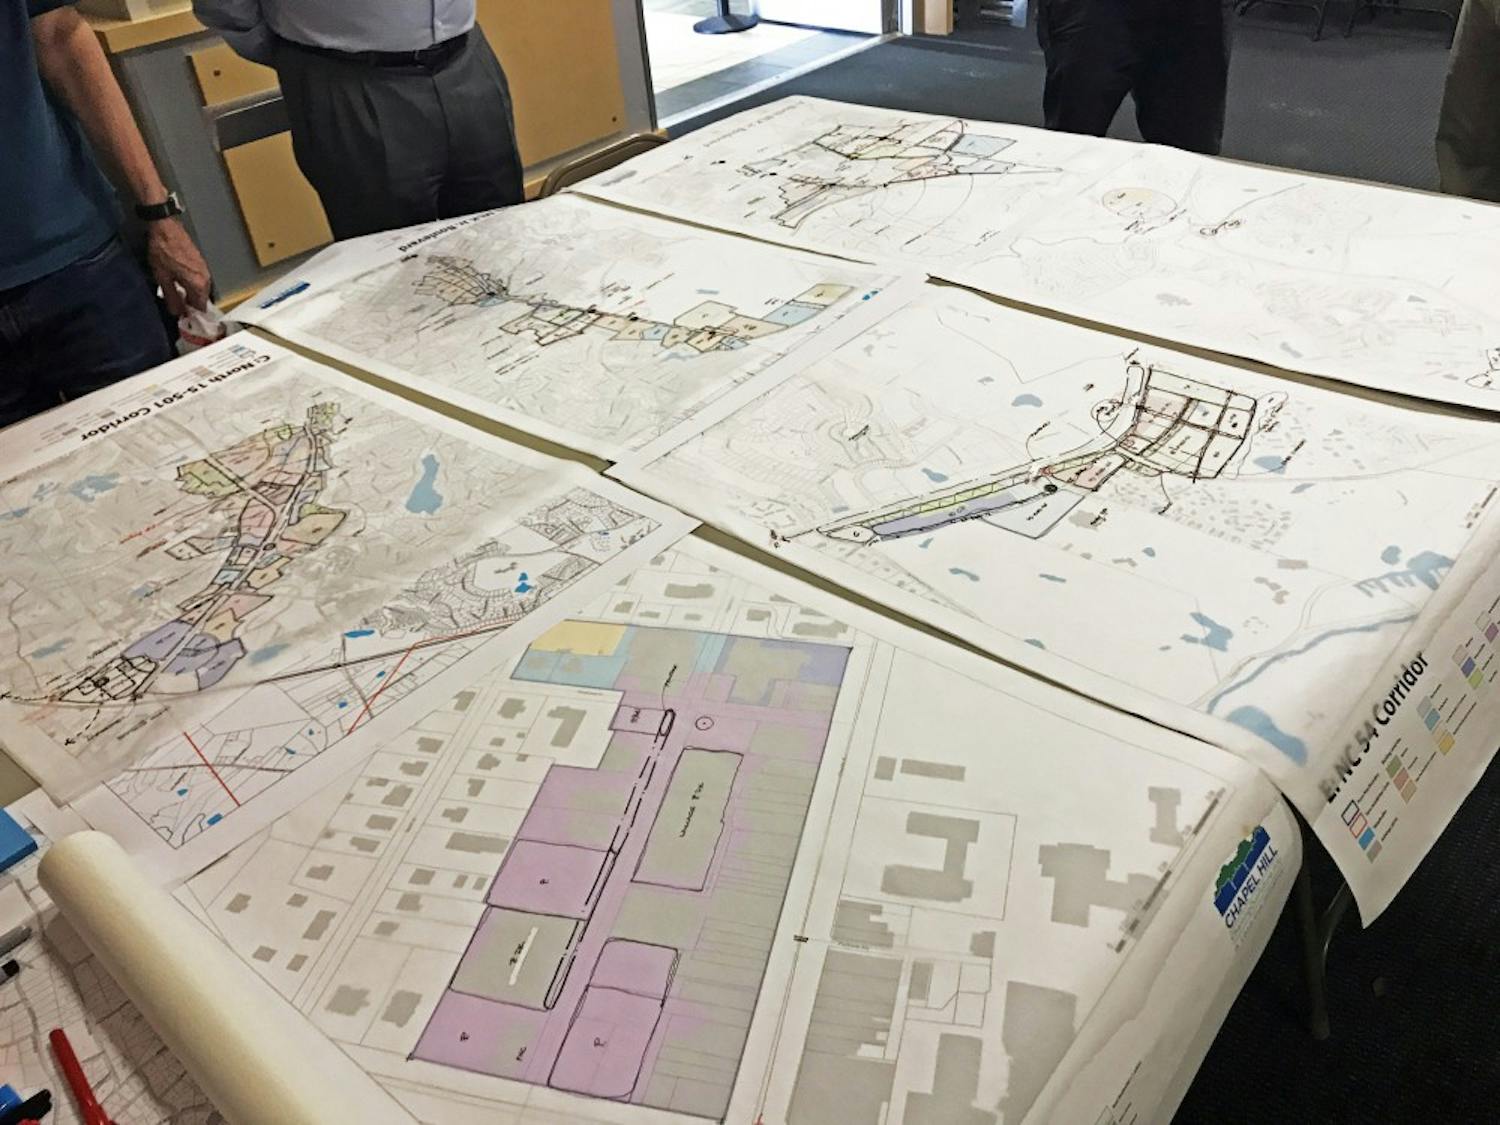 Community members helped map Chapel Hill's future through 2049.